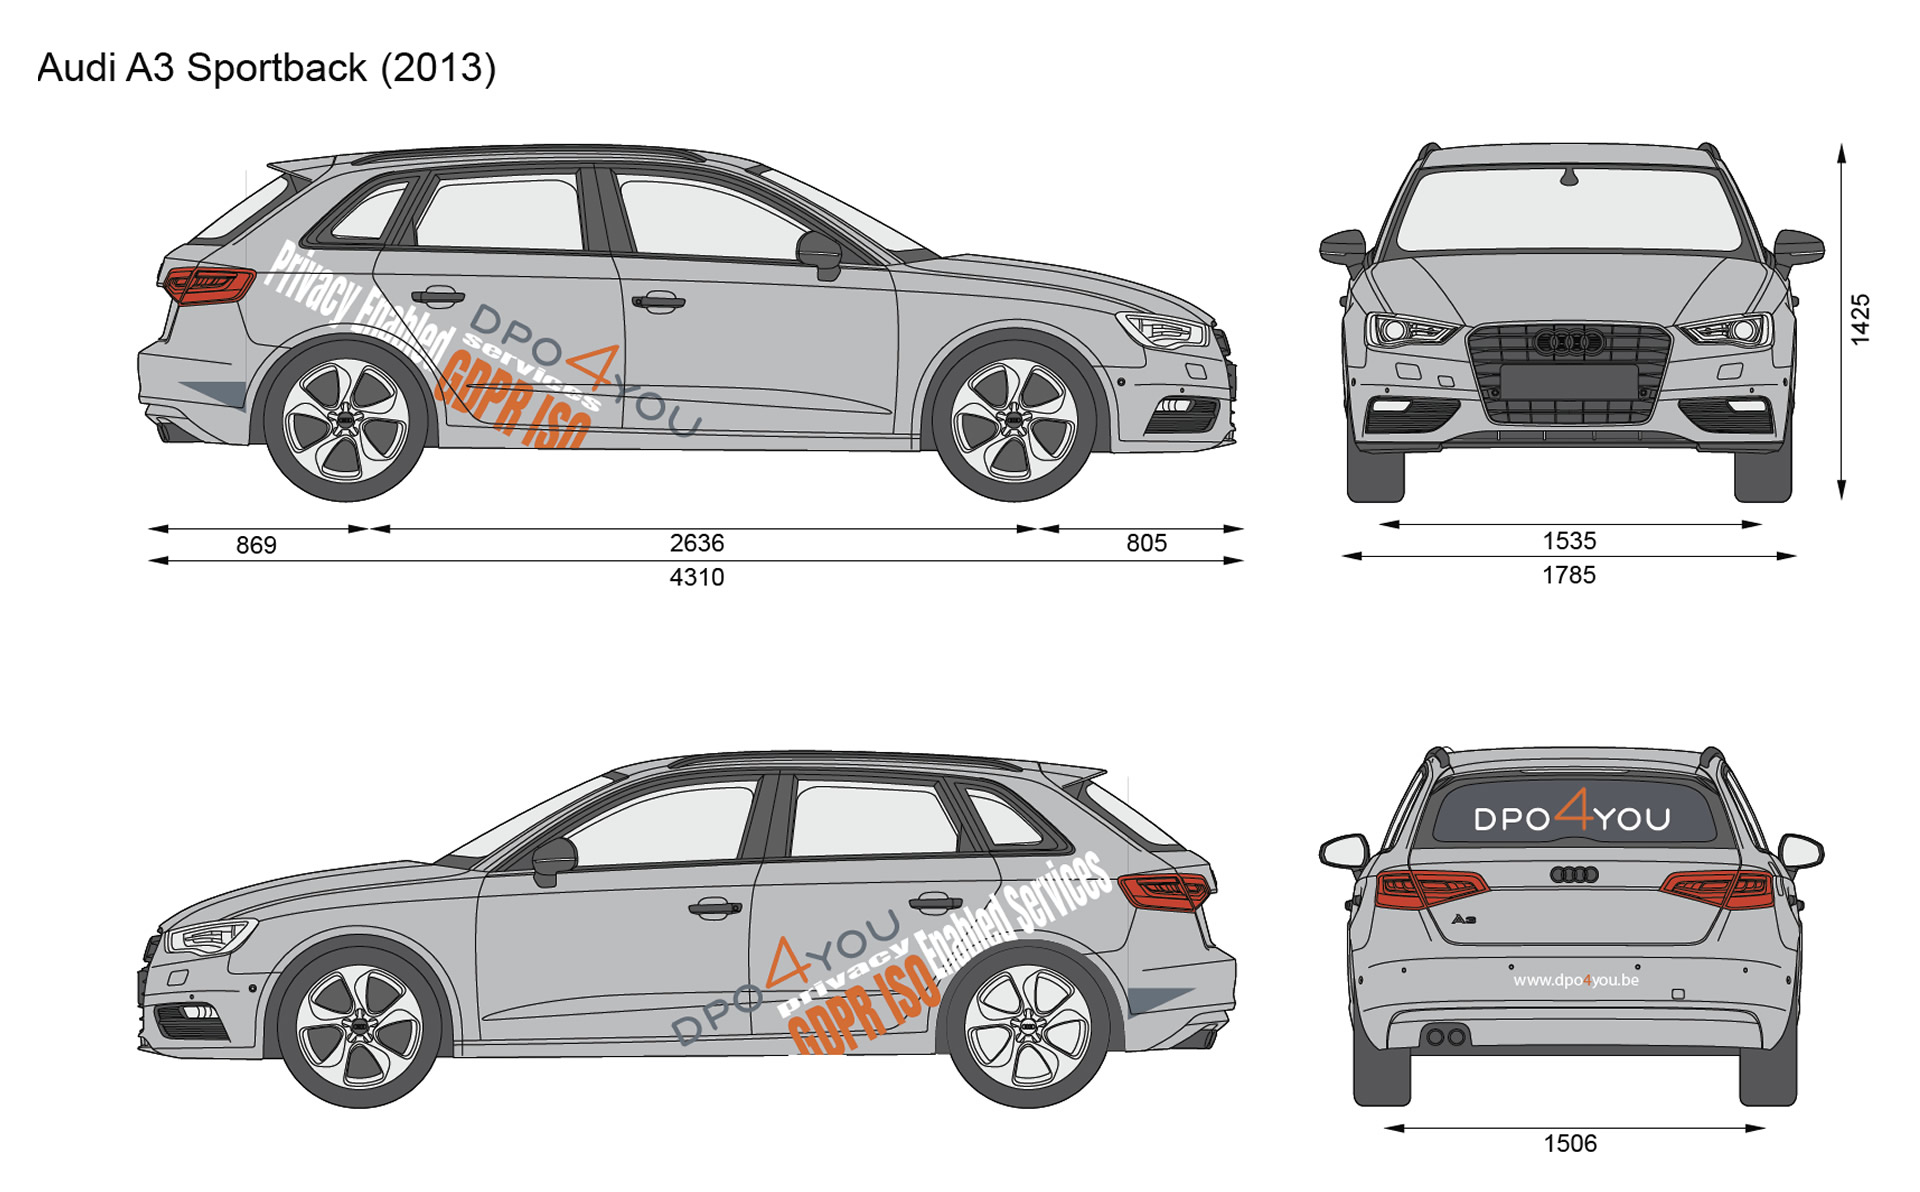 Audi A3 Sportback - MDG Creativity by MDG Promotions bv - dpo4you - The sign